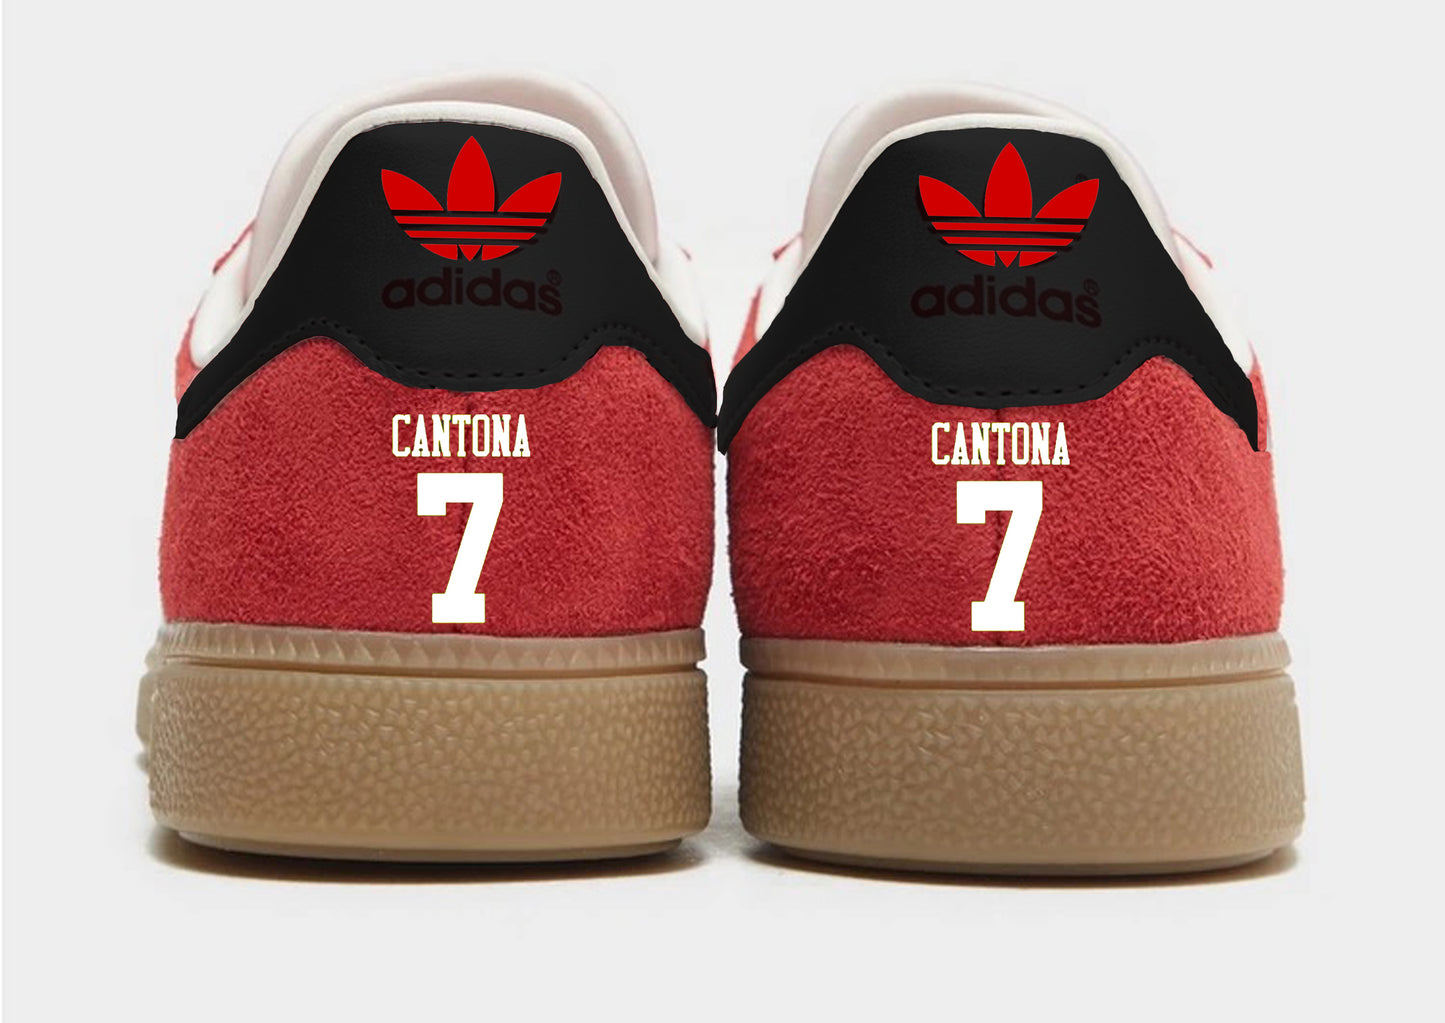 Limited edition Manchester United Eric Cantona inspired Red / Black Adidas custom Munchen trainers  / sneakers